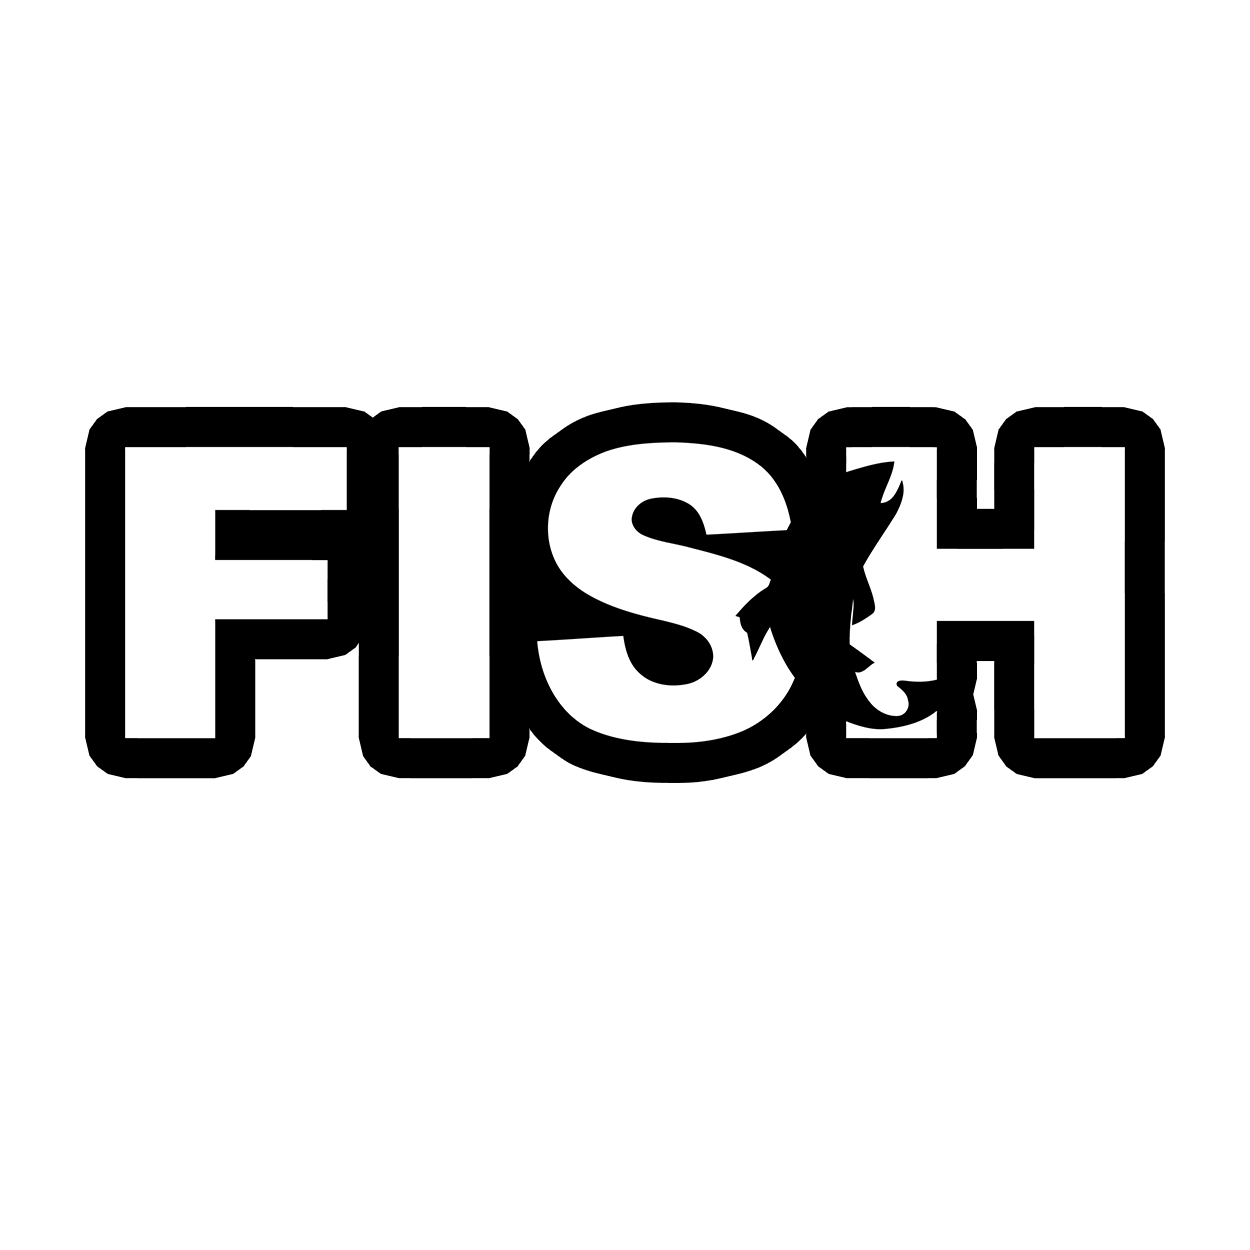 Fish Catch Logo Classic Sticker (White Logo) FREE Promotional Giveaway from FishBrand.co